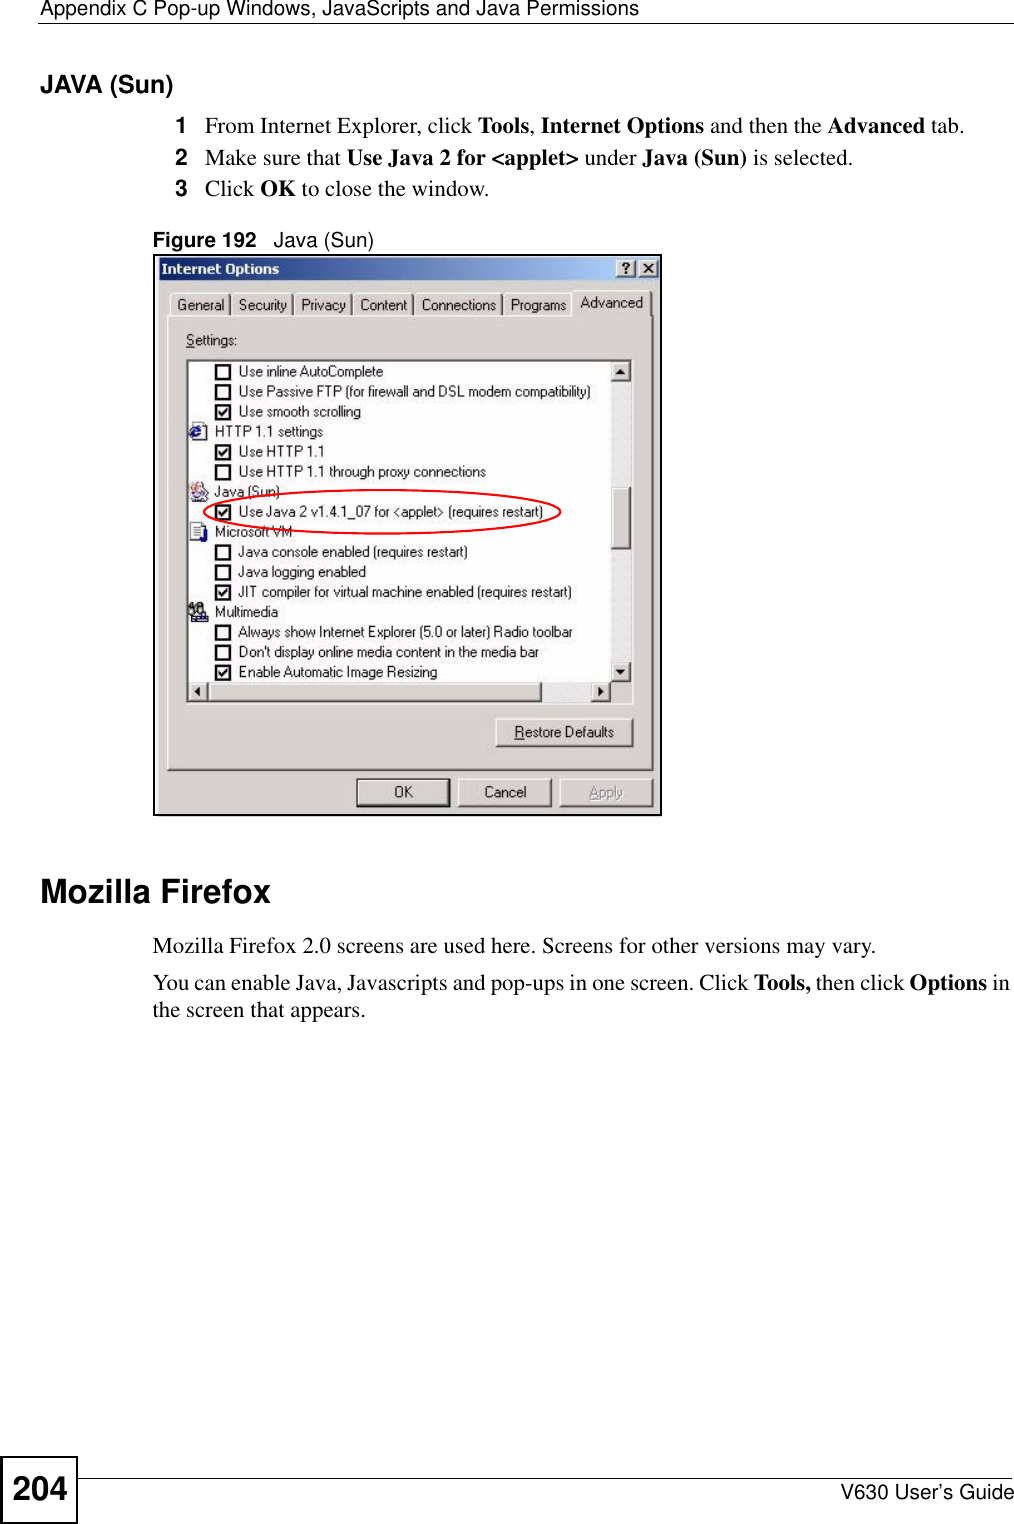 Appendix C Pop-up Windows, JavaScripts and Java PermissionsV630 User’s Guide204JAVA (Sun)1From Internet Explorer, click Tools, Internet Options and then the Advanced tab. 2Make sure that Use Java 2 for &lt;applet&gt; under Java (Sun) is selected.3Click OK to close the window.Figure 192   Java (Sun)Mozilla FirefoxMozilla Firefox 2.0 screens are used here. Screens for other versions may vary. You can enable Java, Javascripts and pop-ups in one screen. Click Tools, then click Options in the screen that appears.